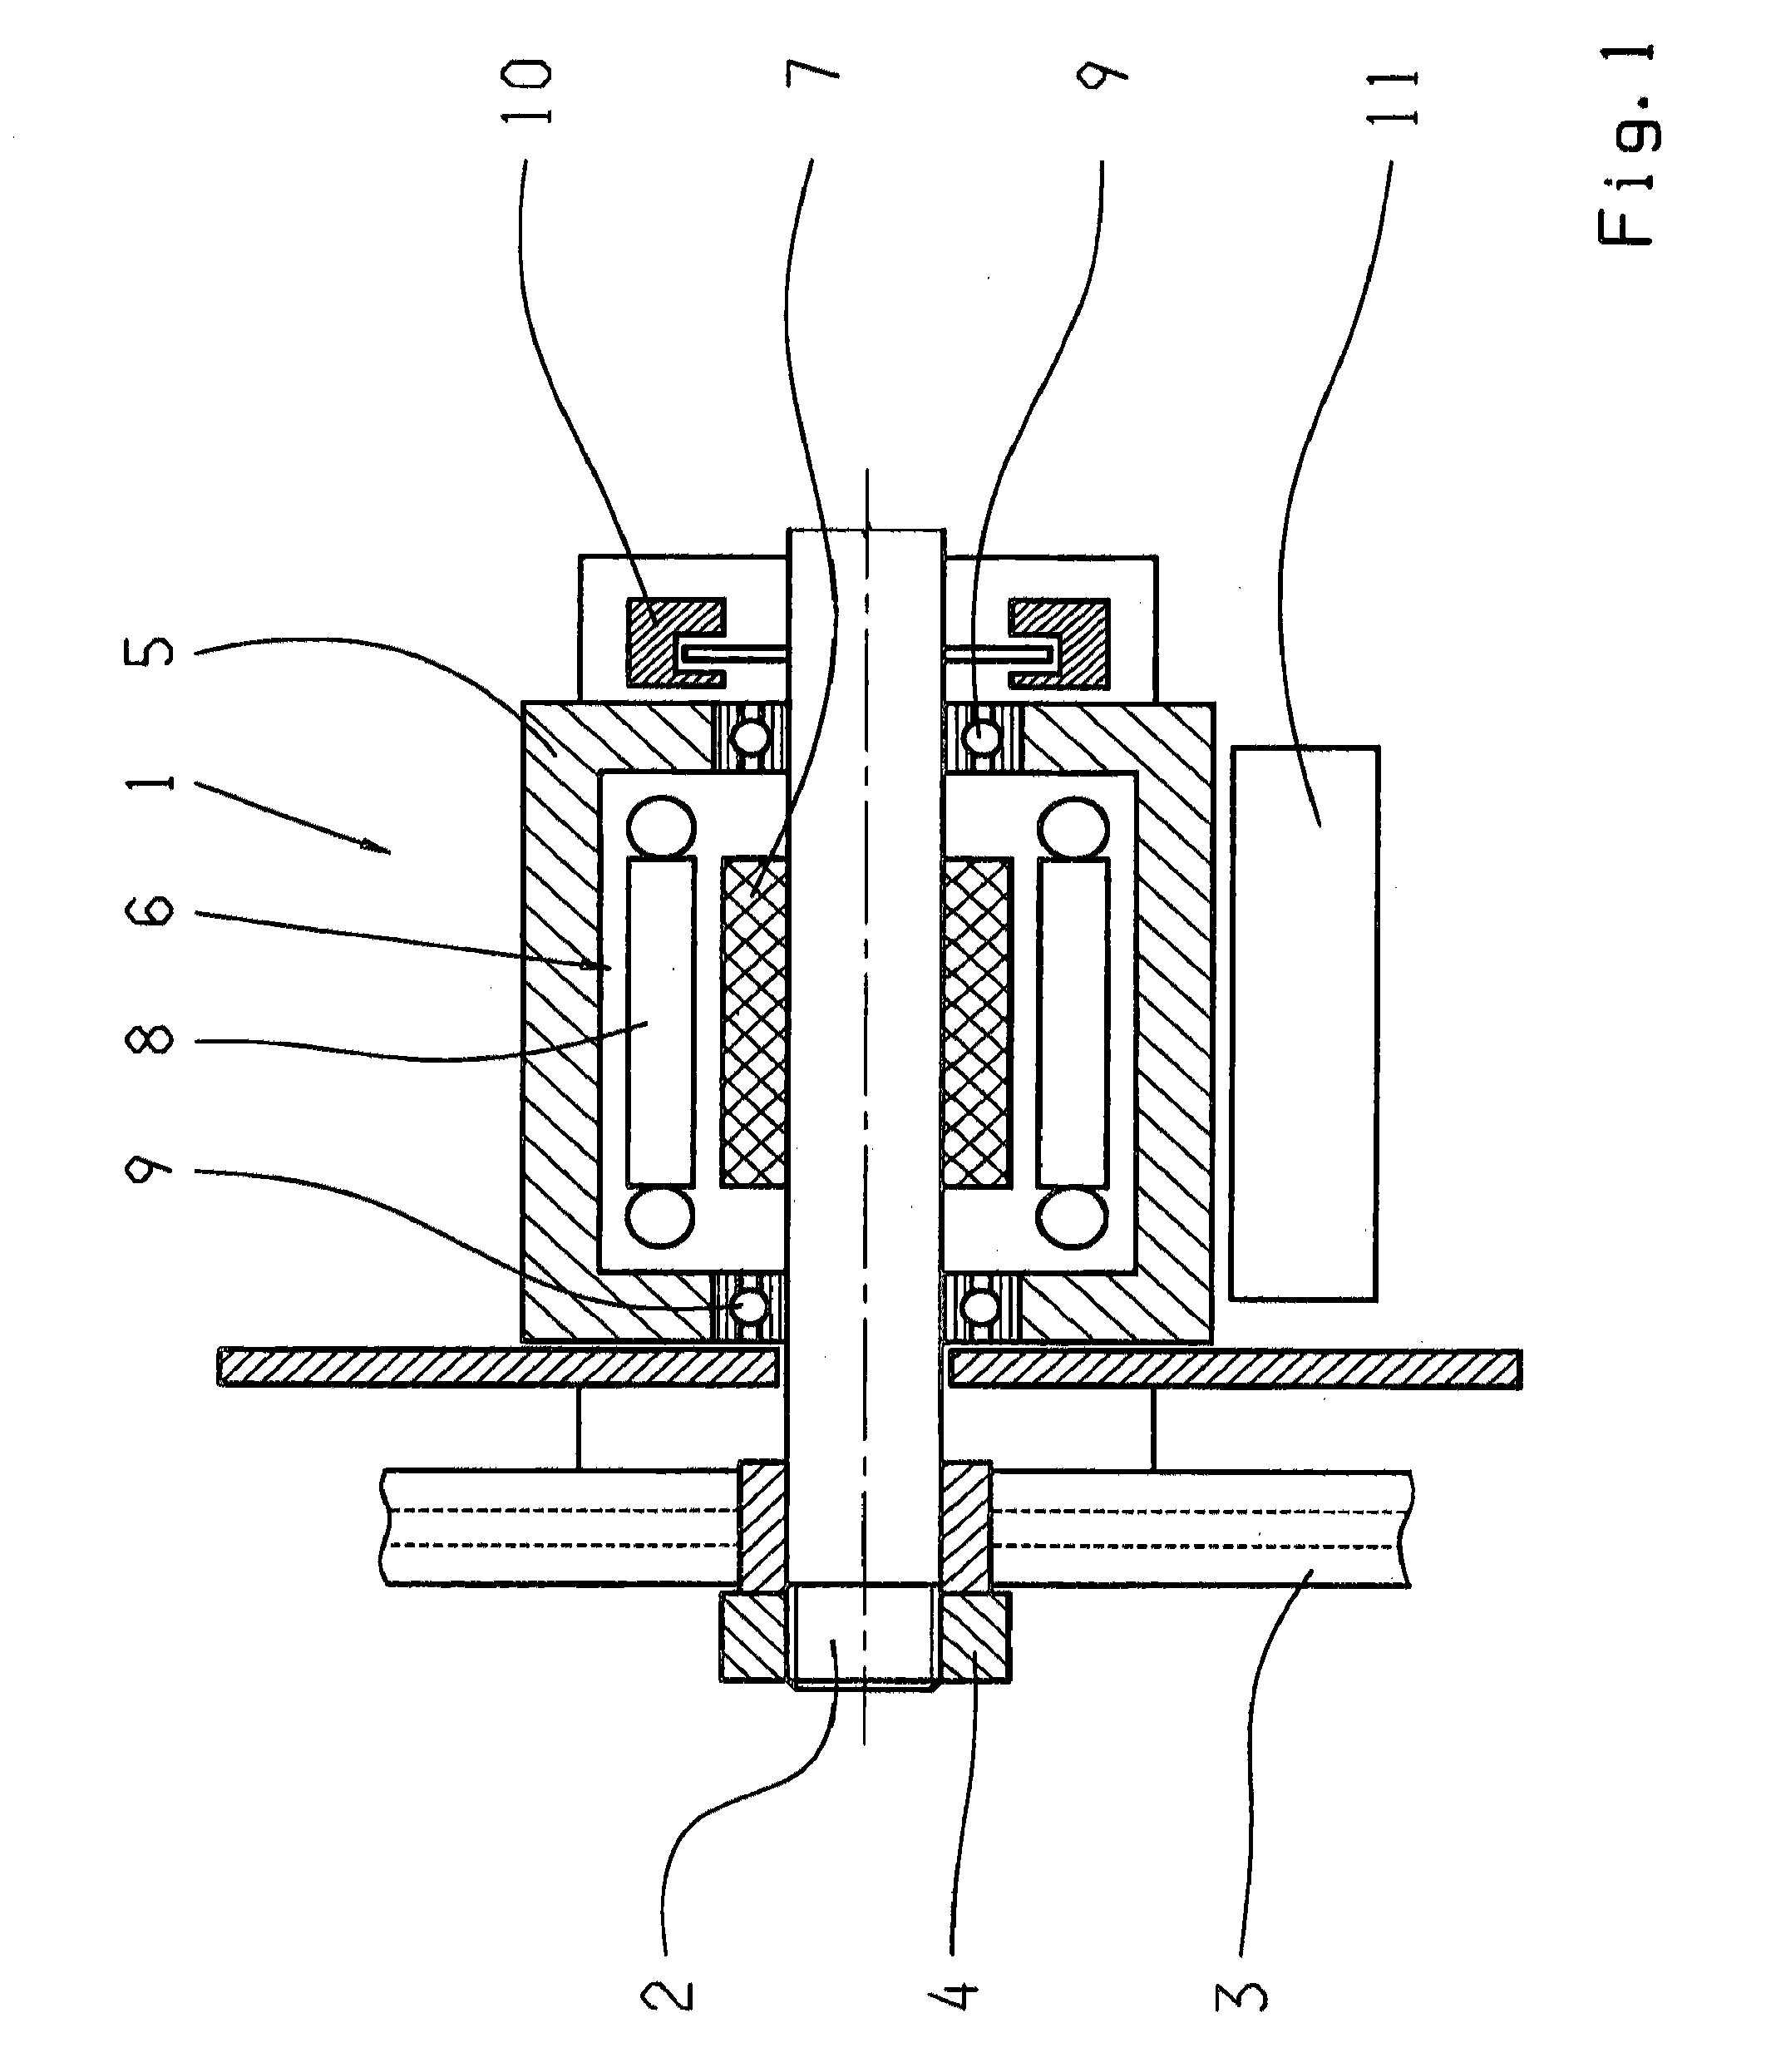 Steering unit for a steer-by-wire ship's control system and method for operating the steering unit